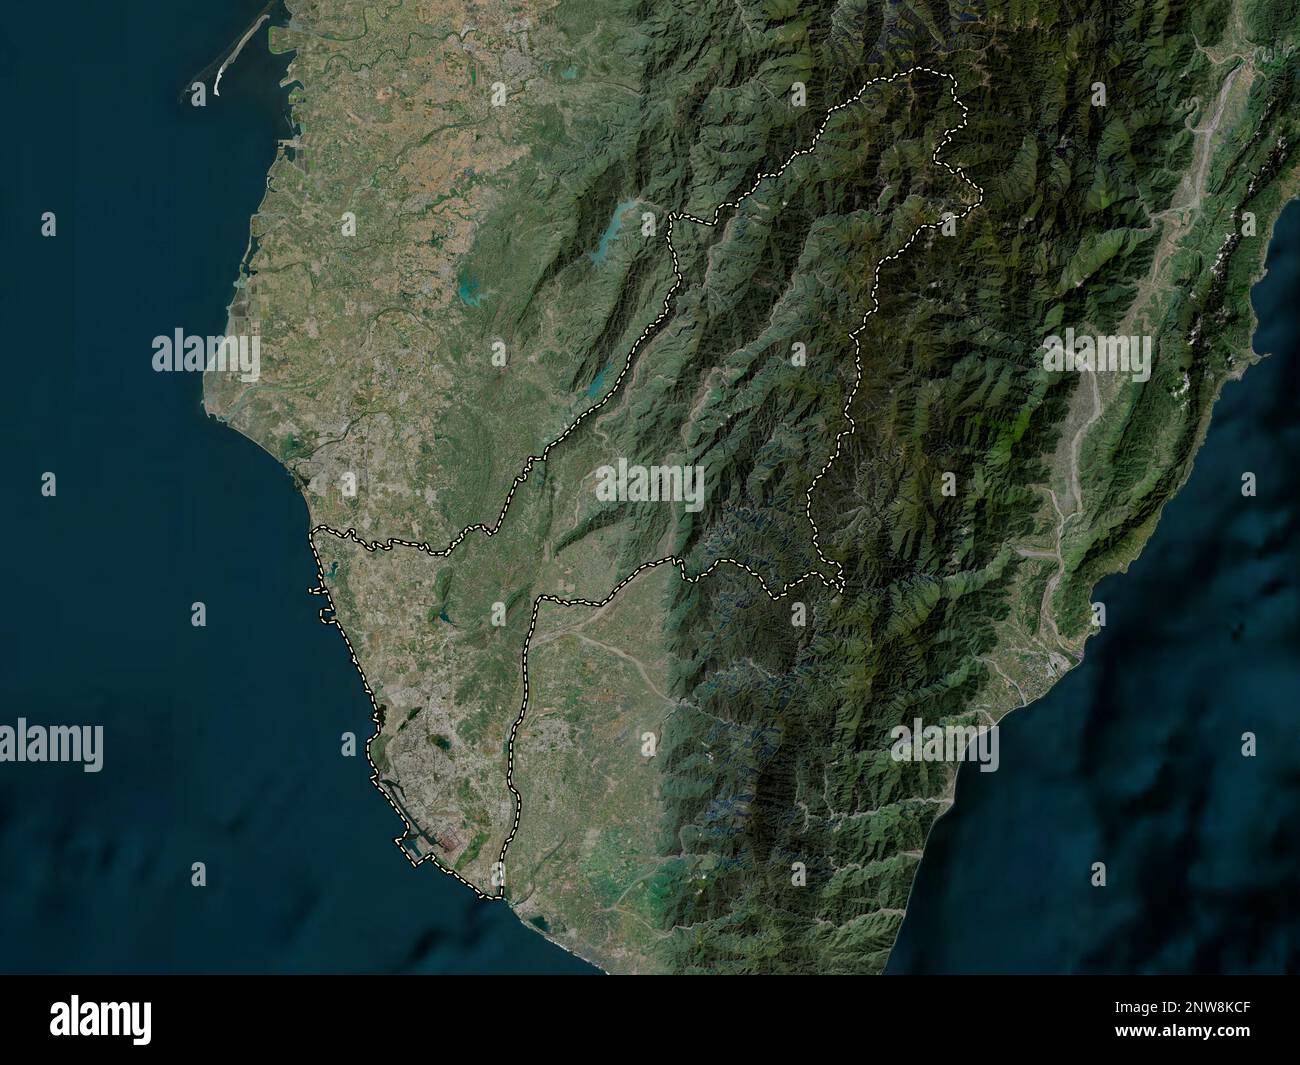 Kaohsiung Special Municipality Of Taiwan High Resolution Satellite Map 2NW8KCF 